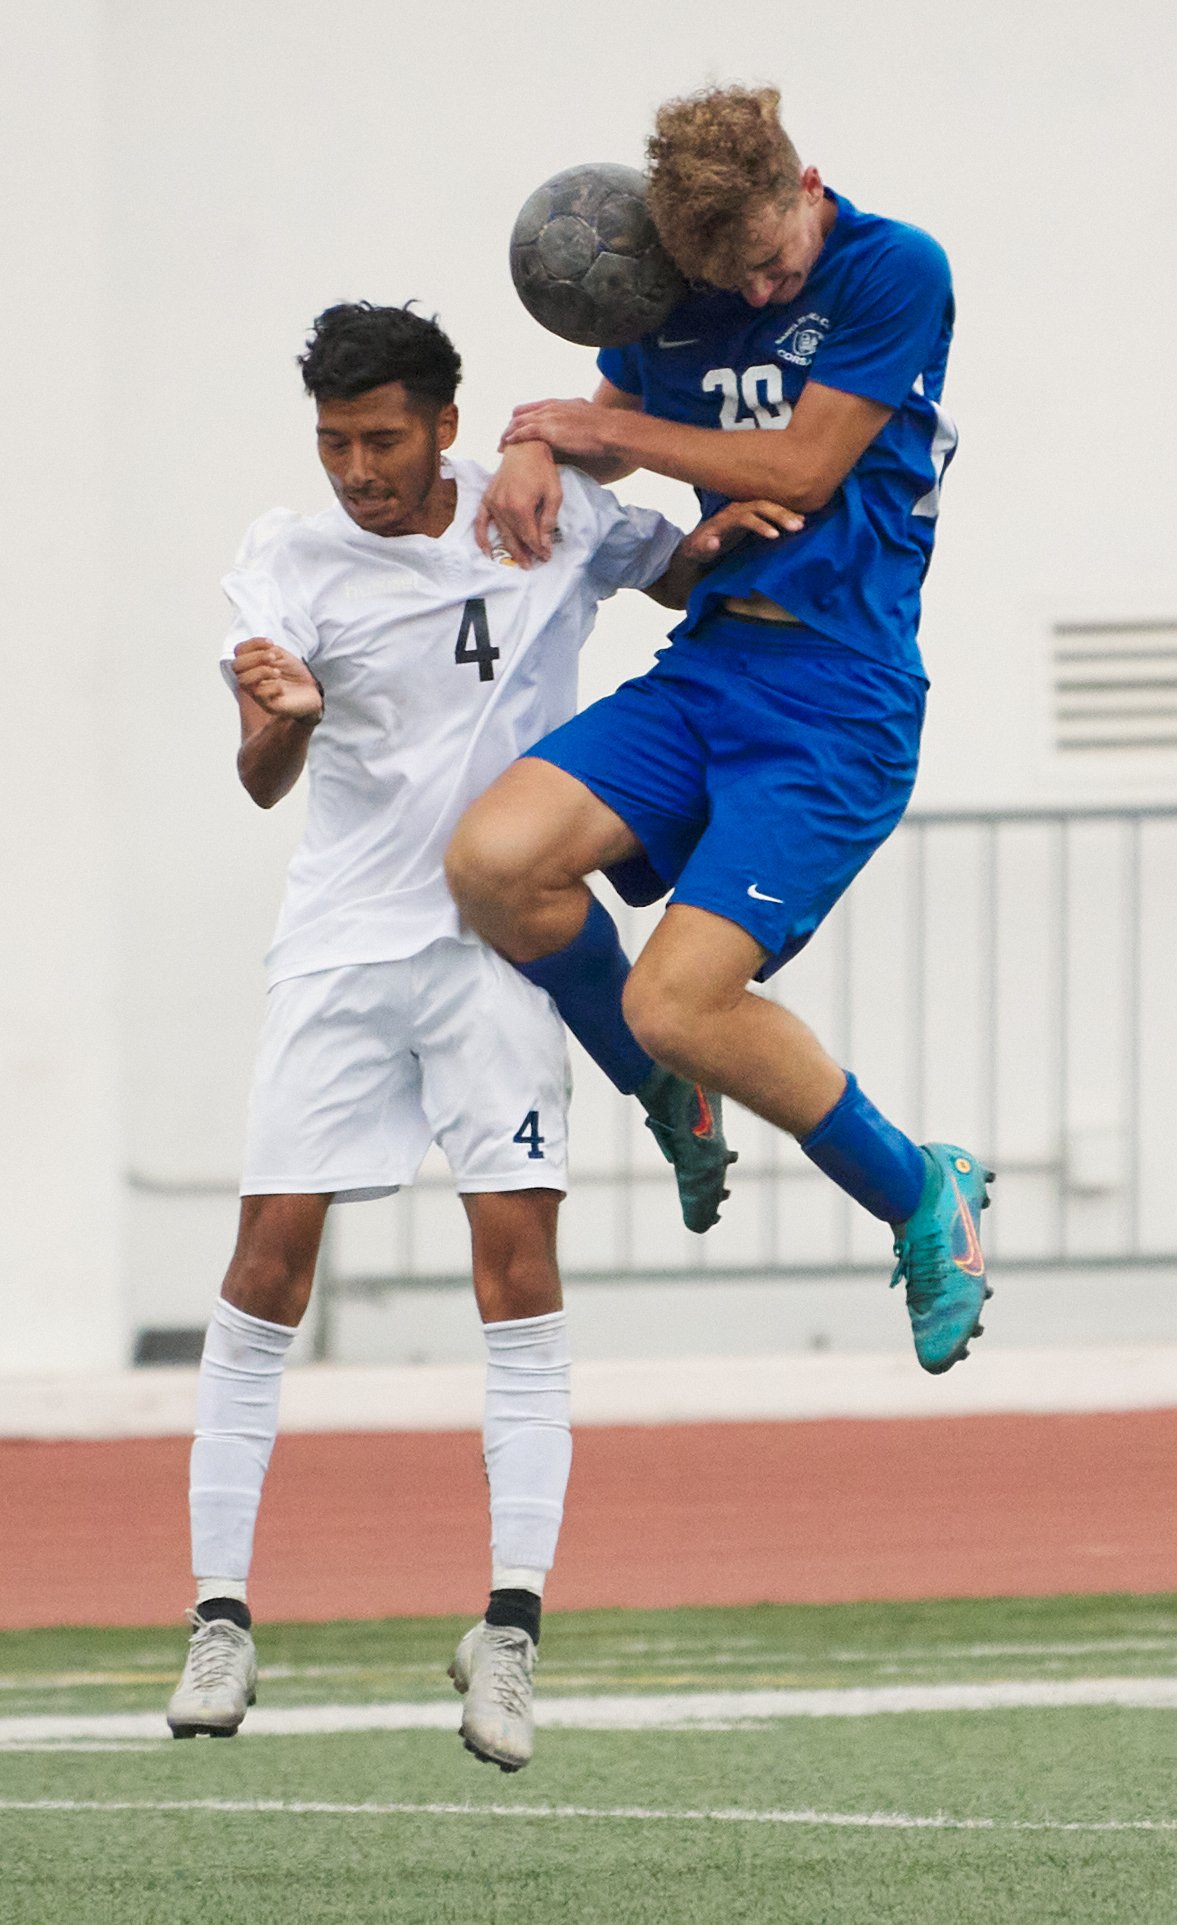  Marcus Hevesy-Rodriguez (right), of the Santa Monica College Corsairs, and Andrew Aguiarcorona (left), of the Los Angeles Harbor College Seahawks, collide during the men's soccer match on Friday, September, 9, 2022, at Corsair Field in Santa Monica,